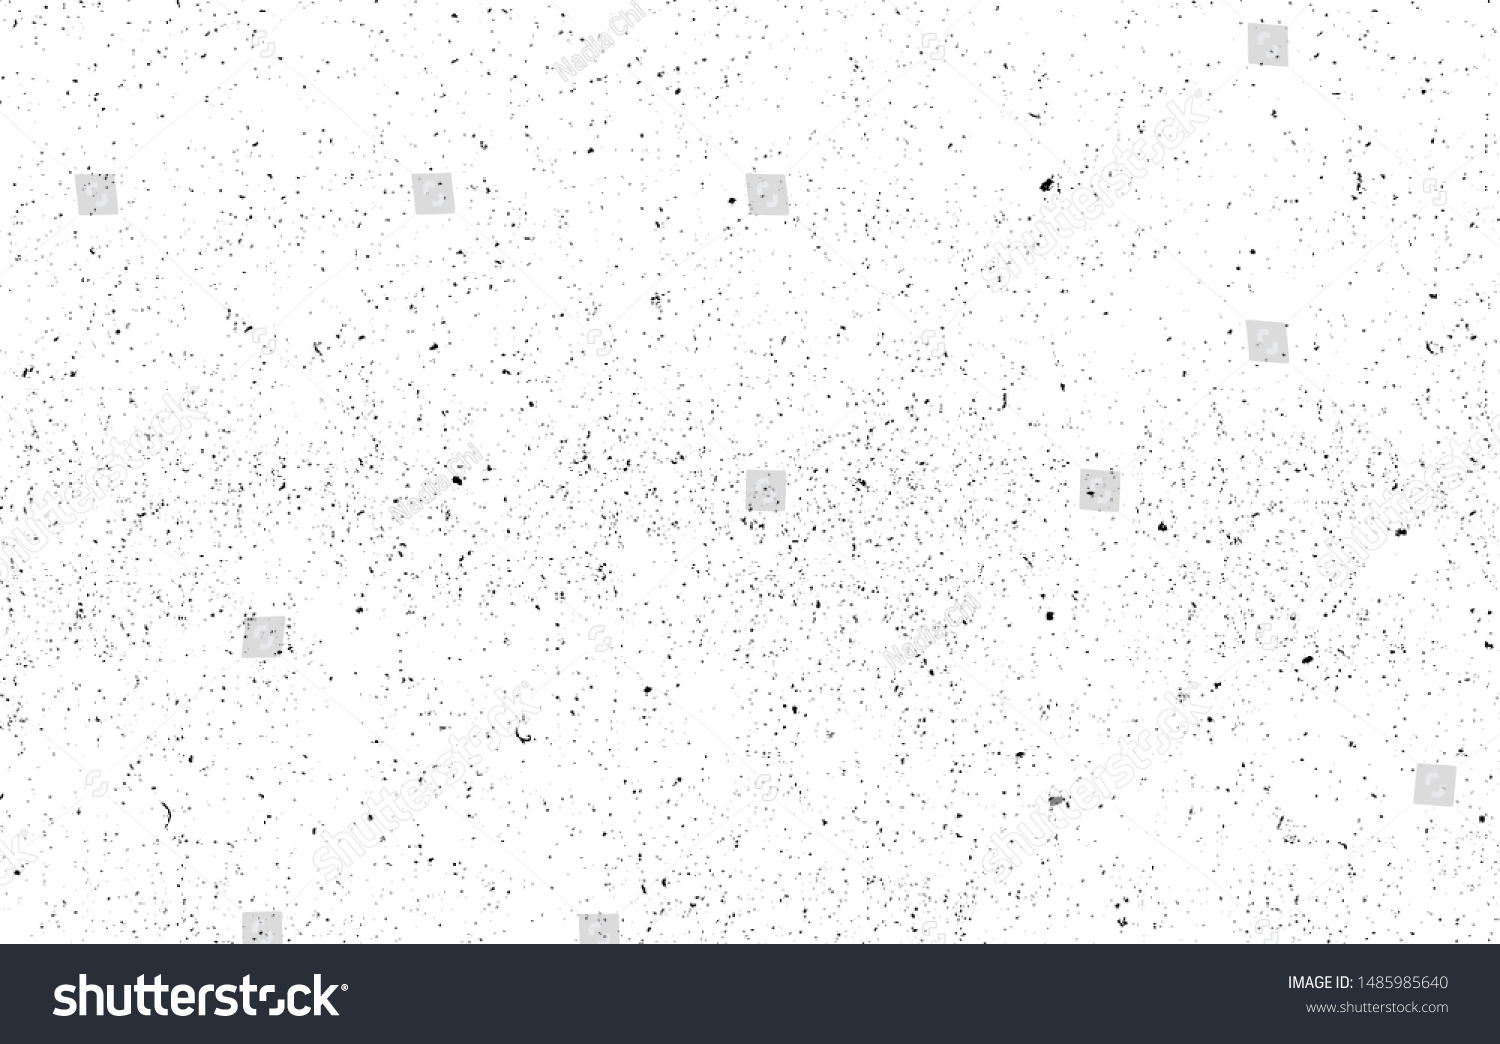 Rough black and white texture vector. Distressed overlay texture. Grunge background. Abstract textured effect. Vector Illustration. Black isolated on white background. EPS10. #1485985640